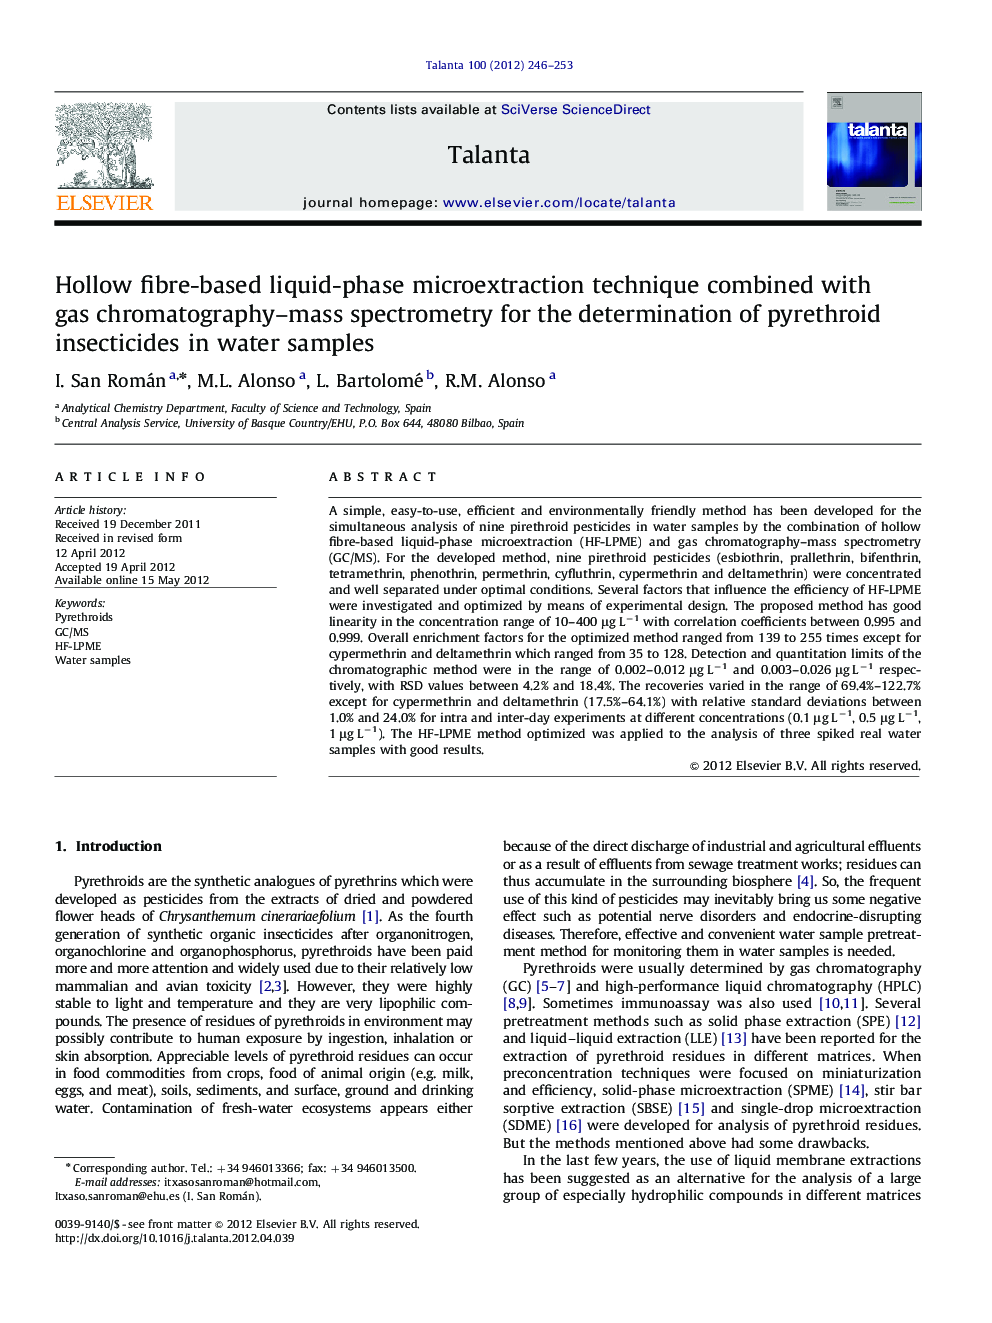 Hollow fibre-based liquid-phase microextraction technique combined with gas chromatography-mass spectrometry for the determination of pyrethroid insecticides in water samples